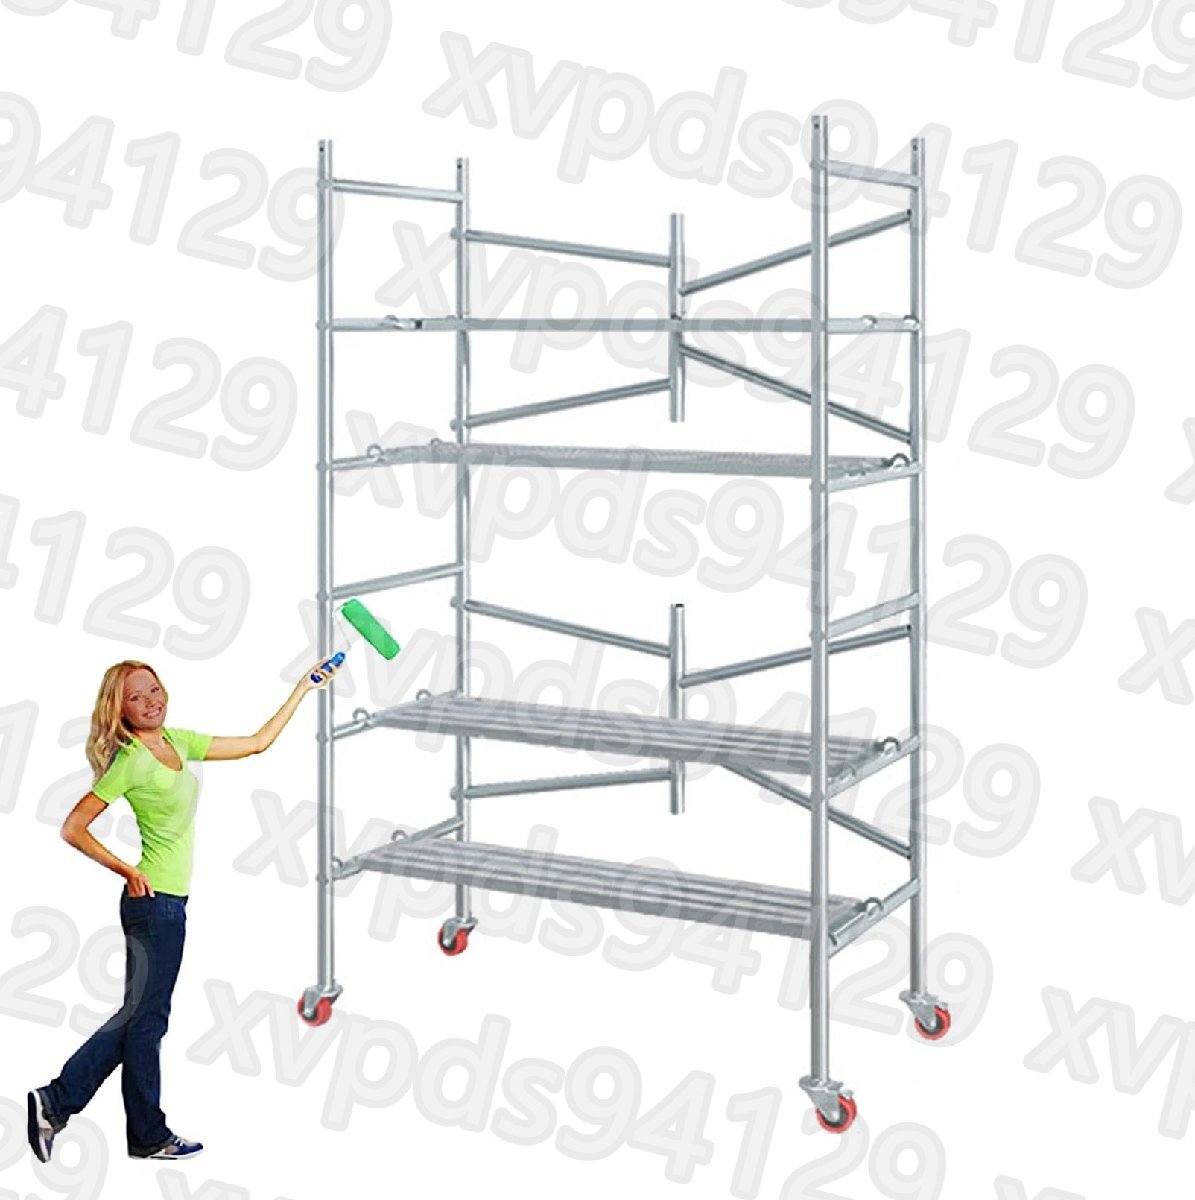  folding scaffold scaffold heights working bench step‐ladder movement type working bench light weight carrying convenience 360° rotation with casters . height 315CM wheel attaching movement type 